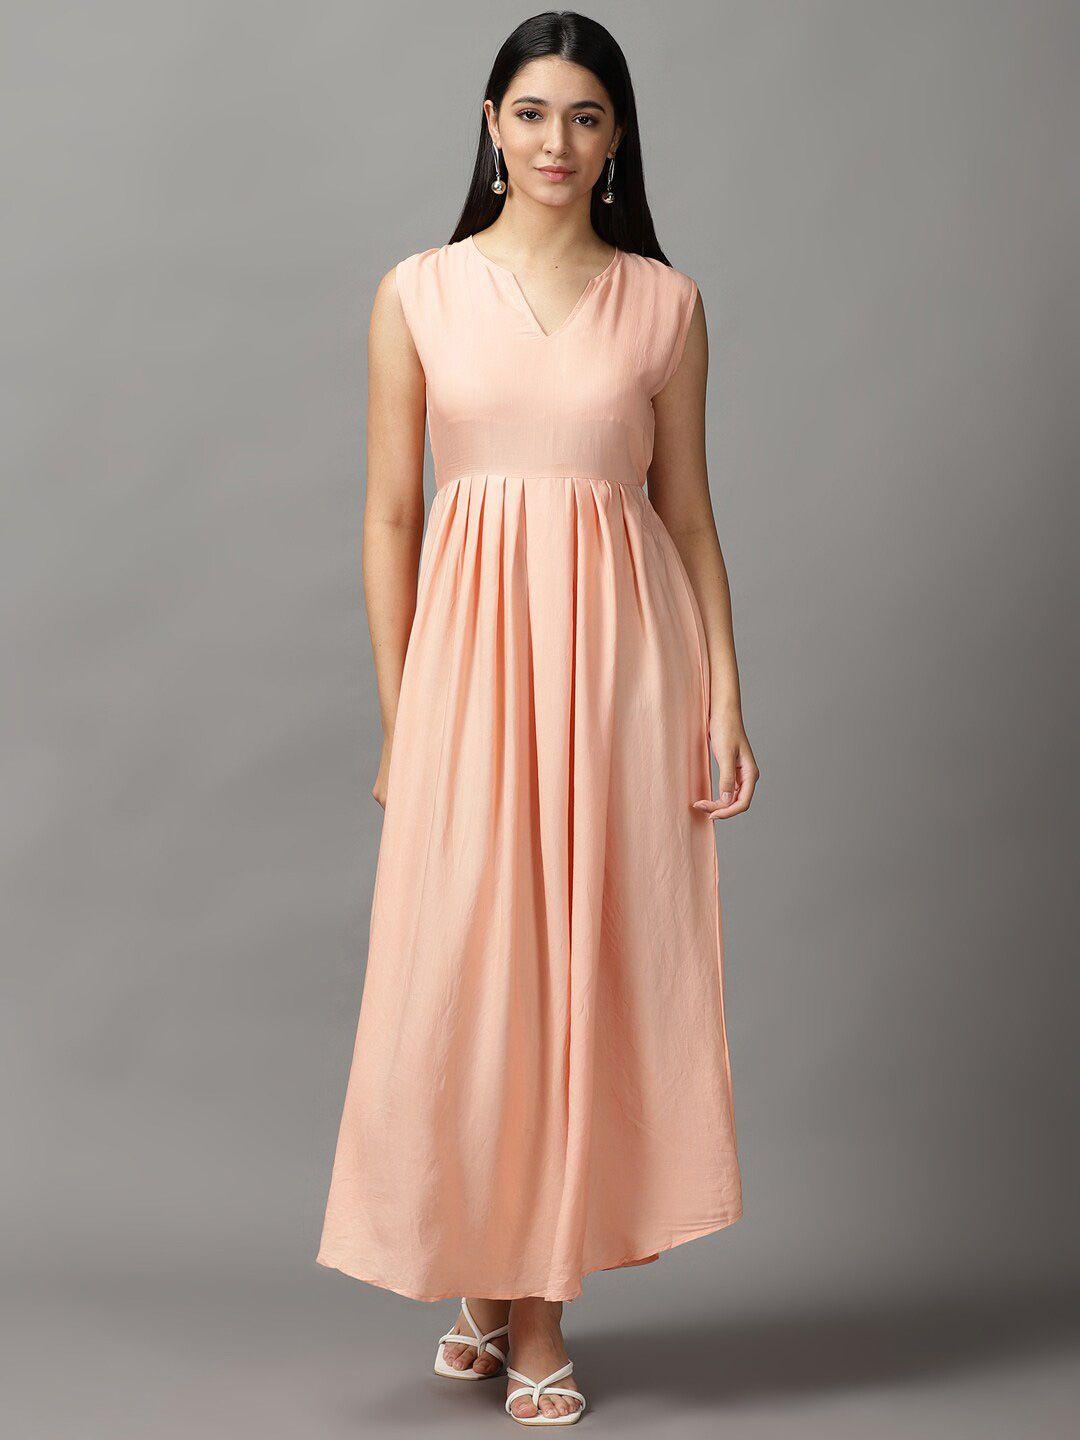 showoff sleeveless fit and flare round neck maxi dress